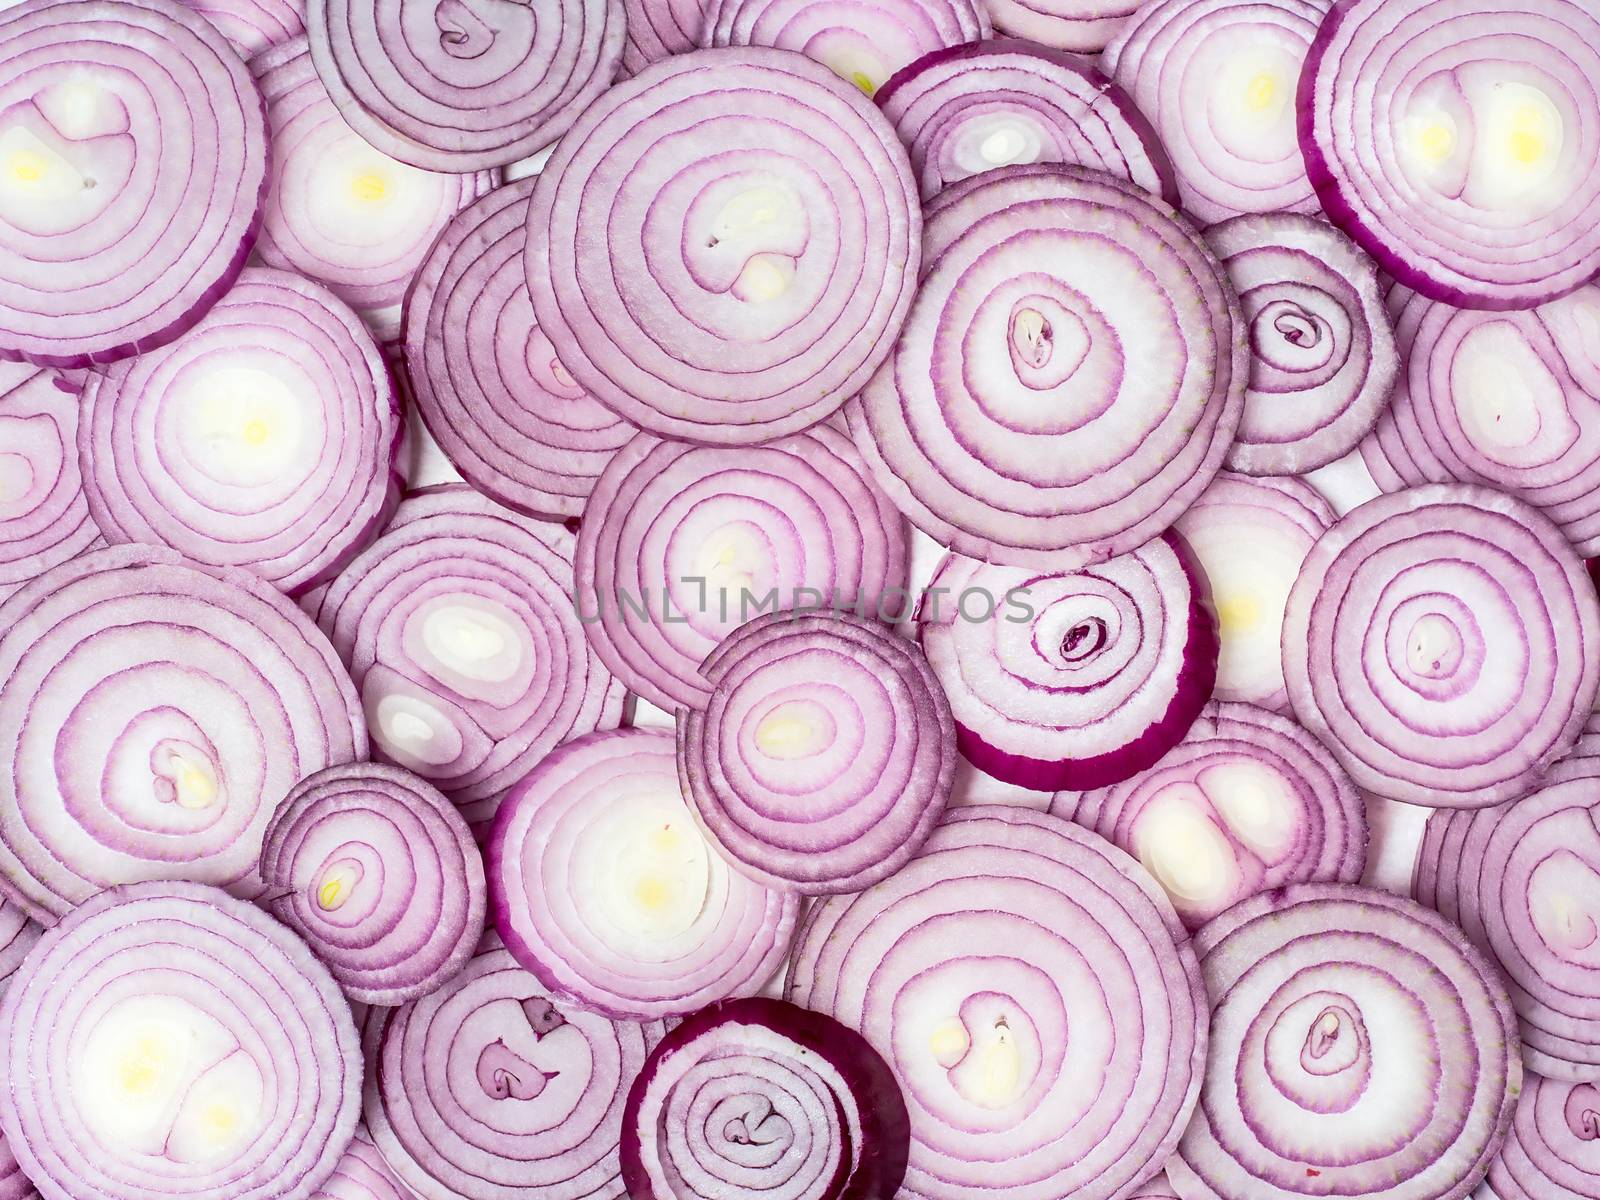 Red onion background by sumners